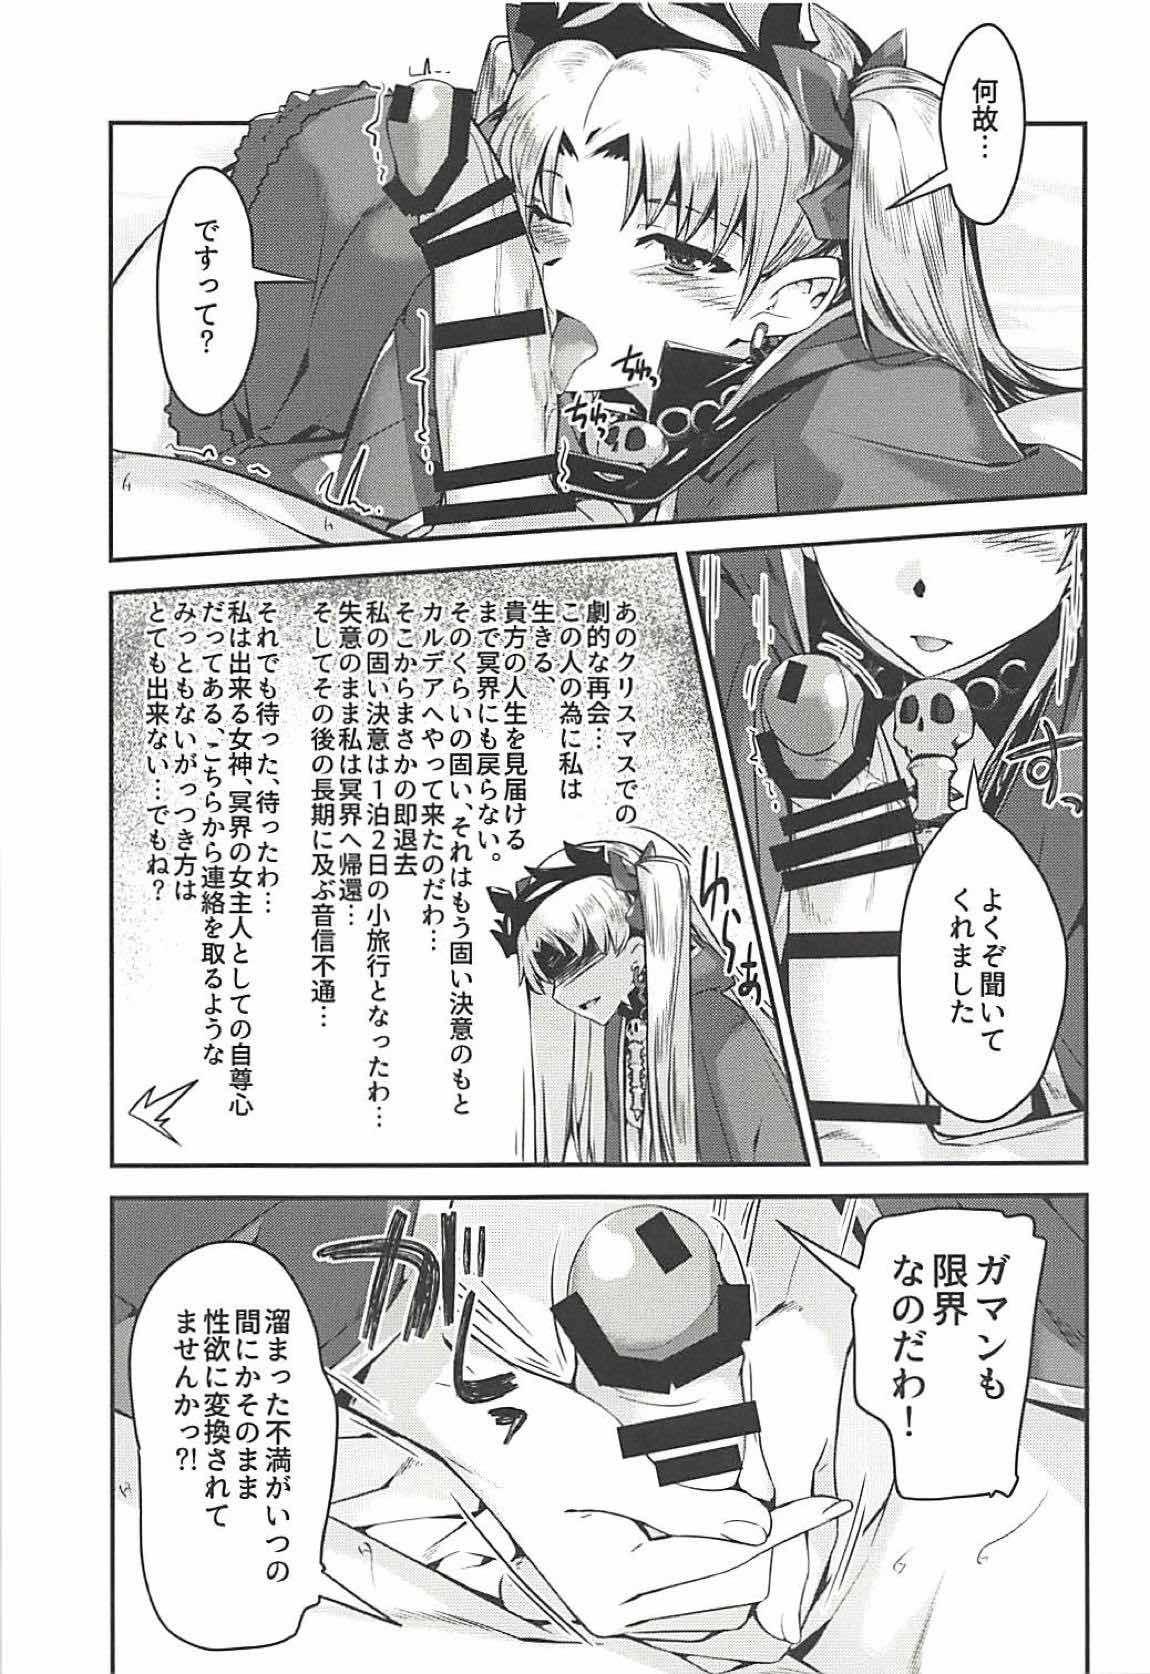 Salope Ere-chan to! - Fate grand order Oldman - Page 5